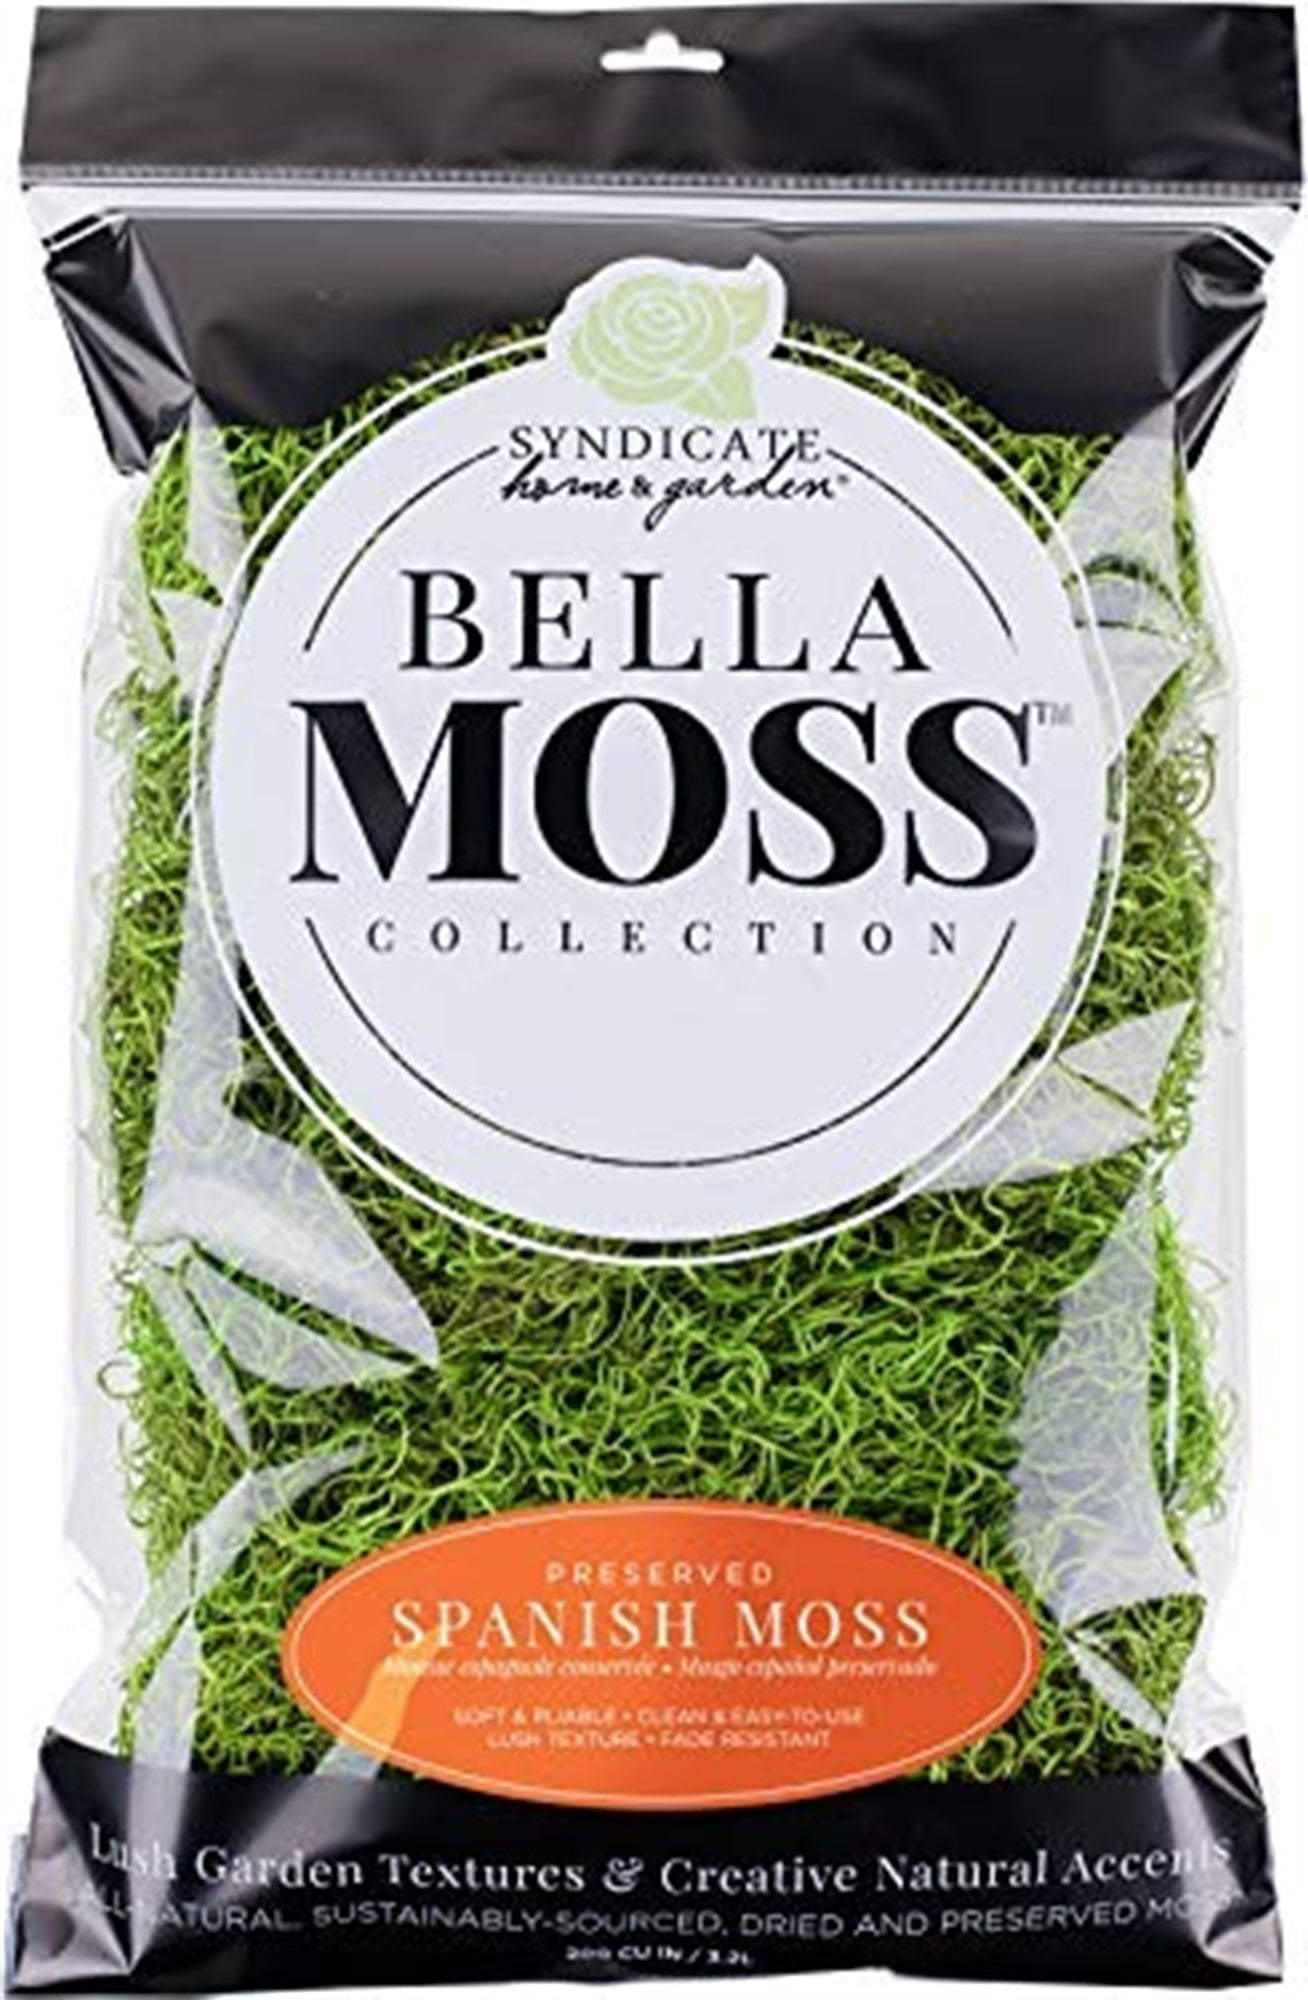 9 OZ Preserved Moss, Natural Live Moss, Fake Moss for Potted Plants,  Spanish Moss for Terrariums Gardening Art, Vase Fillers, Craft Floral Wall,  Wedding Decor (Green, Purple, Pink)